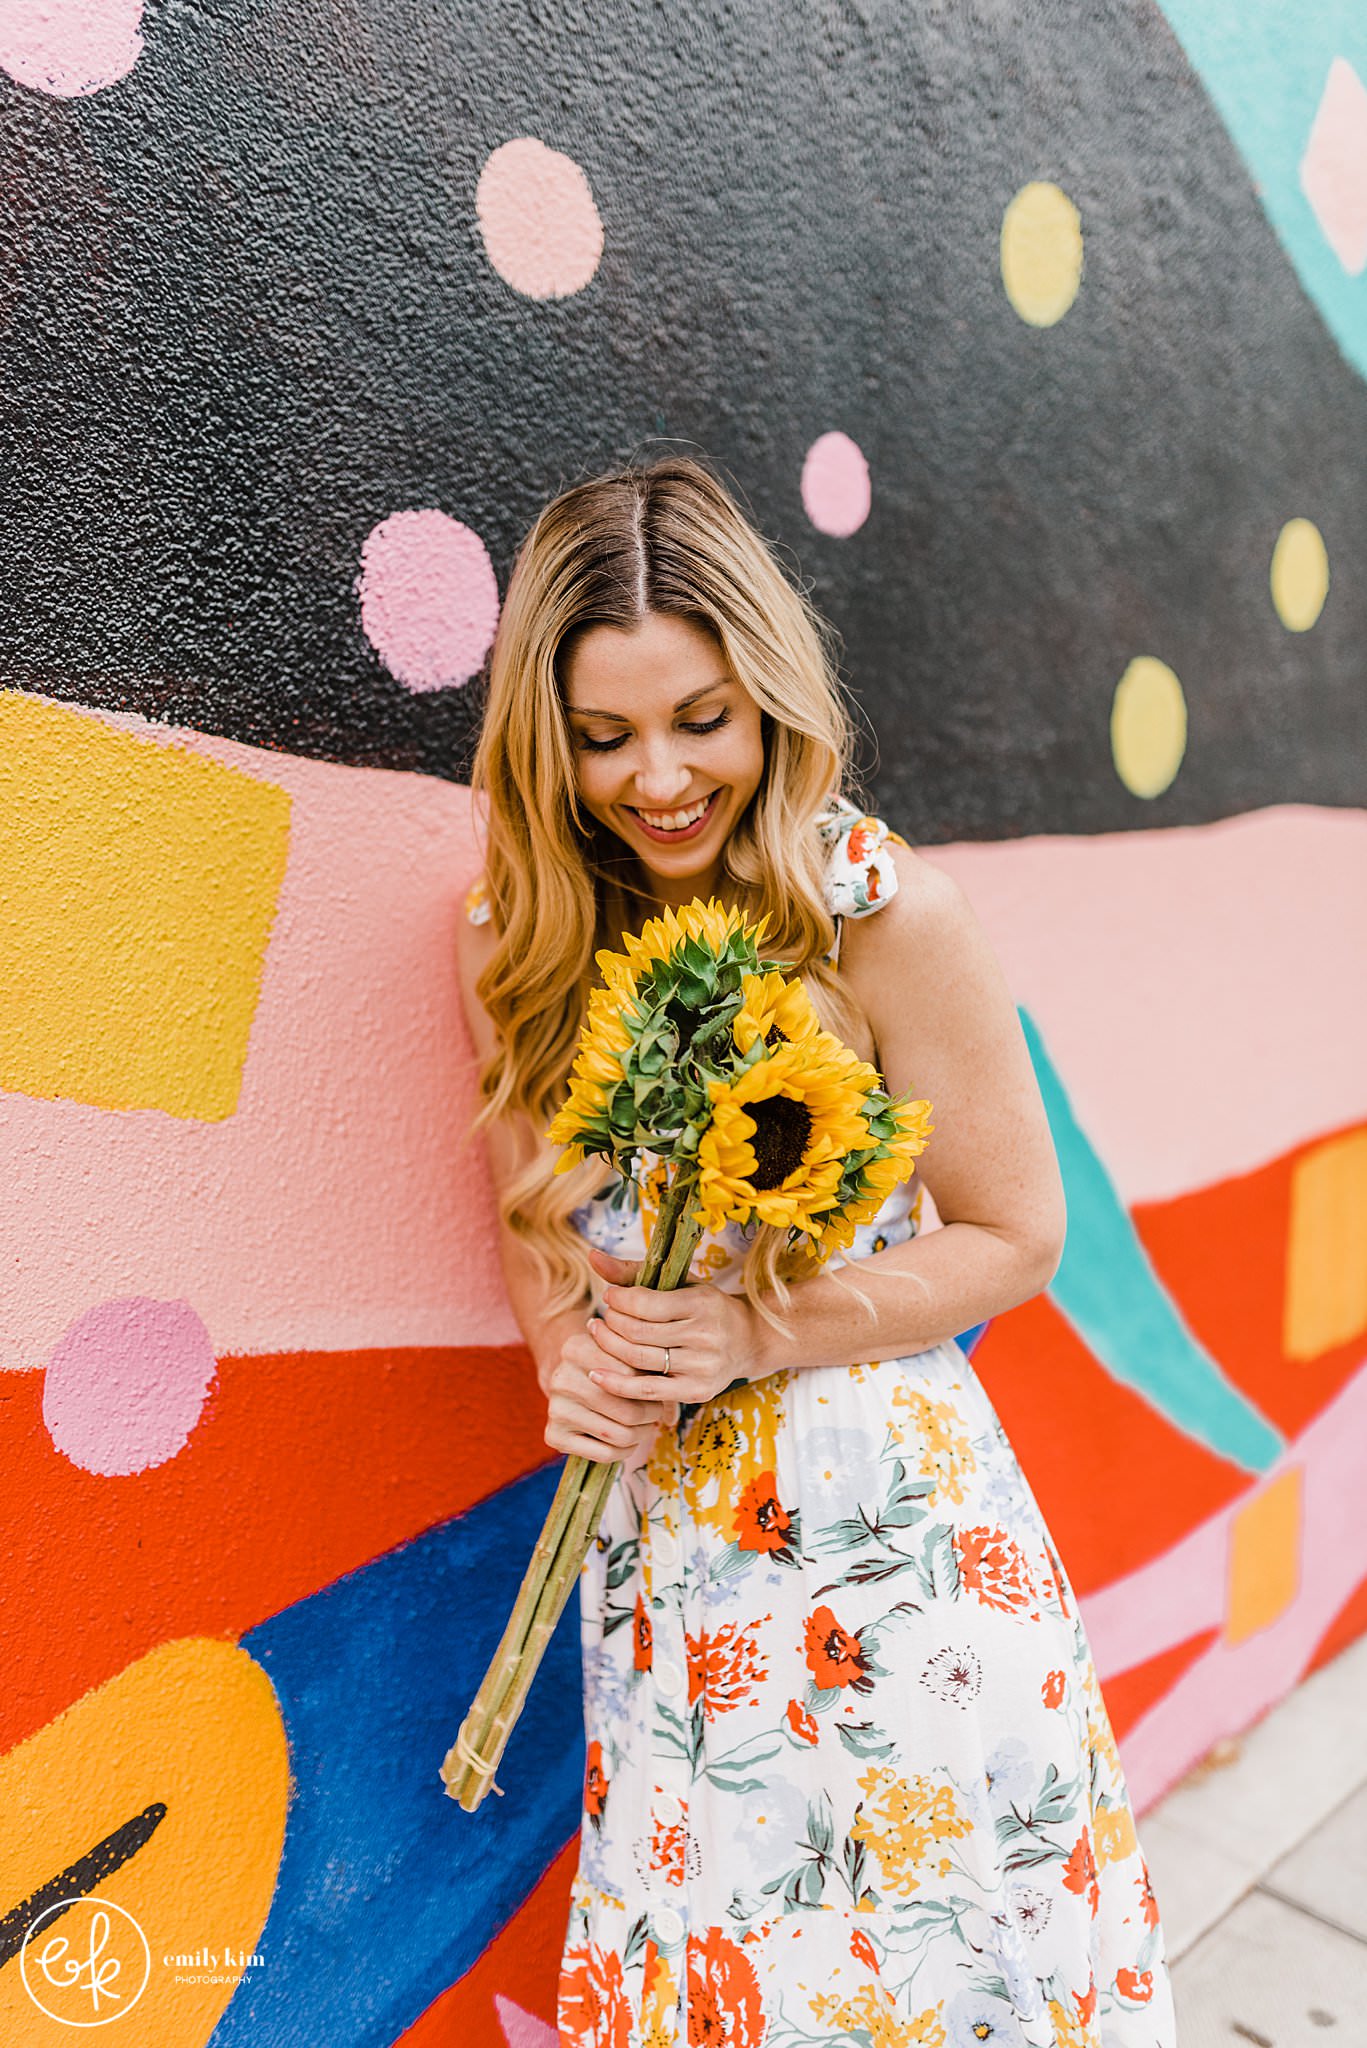 A woman leaning against a colorful mural holding sunflowers in San Jose.